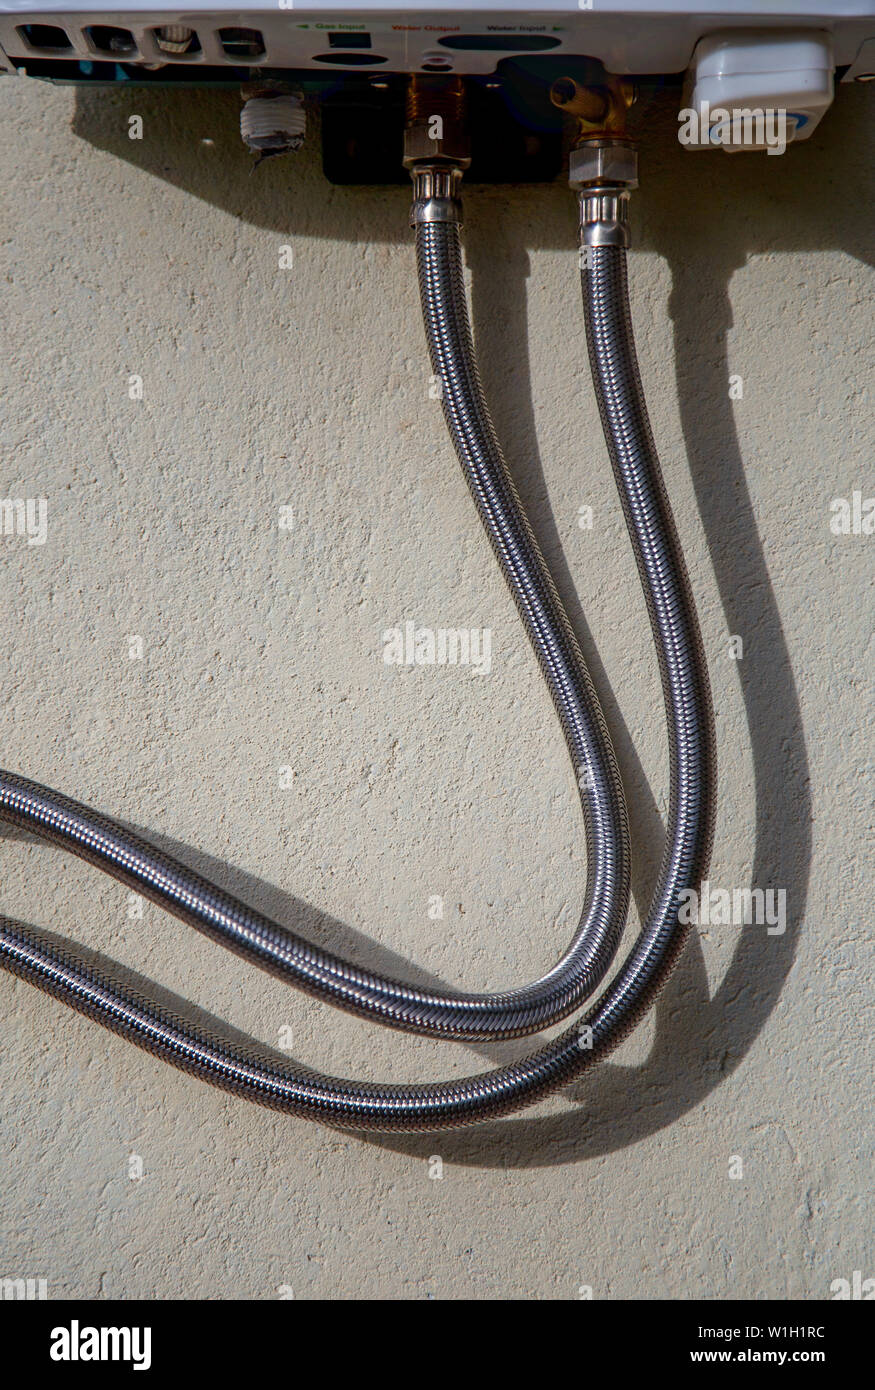 Close-up photography of two propane hoses connected to a gas water heater, casting a shadow on a rough wall. Captured at the Andean mountains of centr Stock Photo